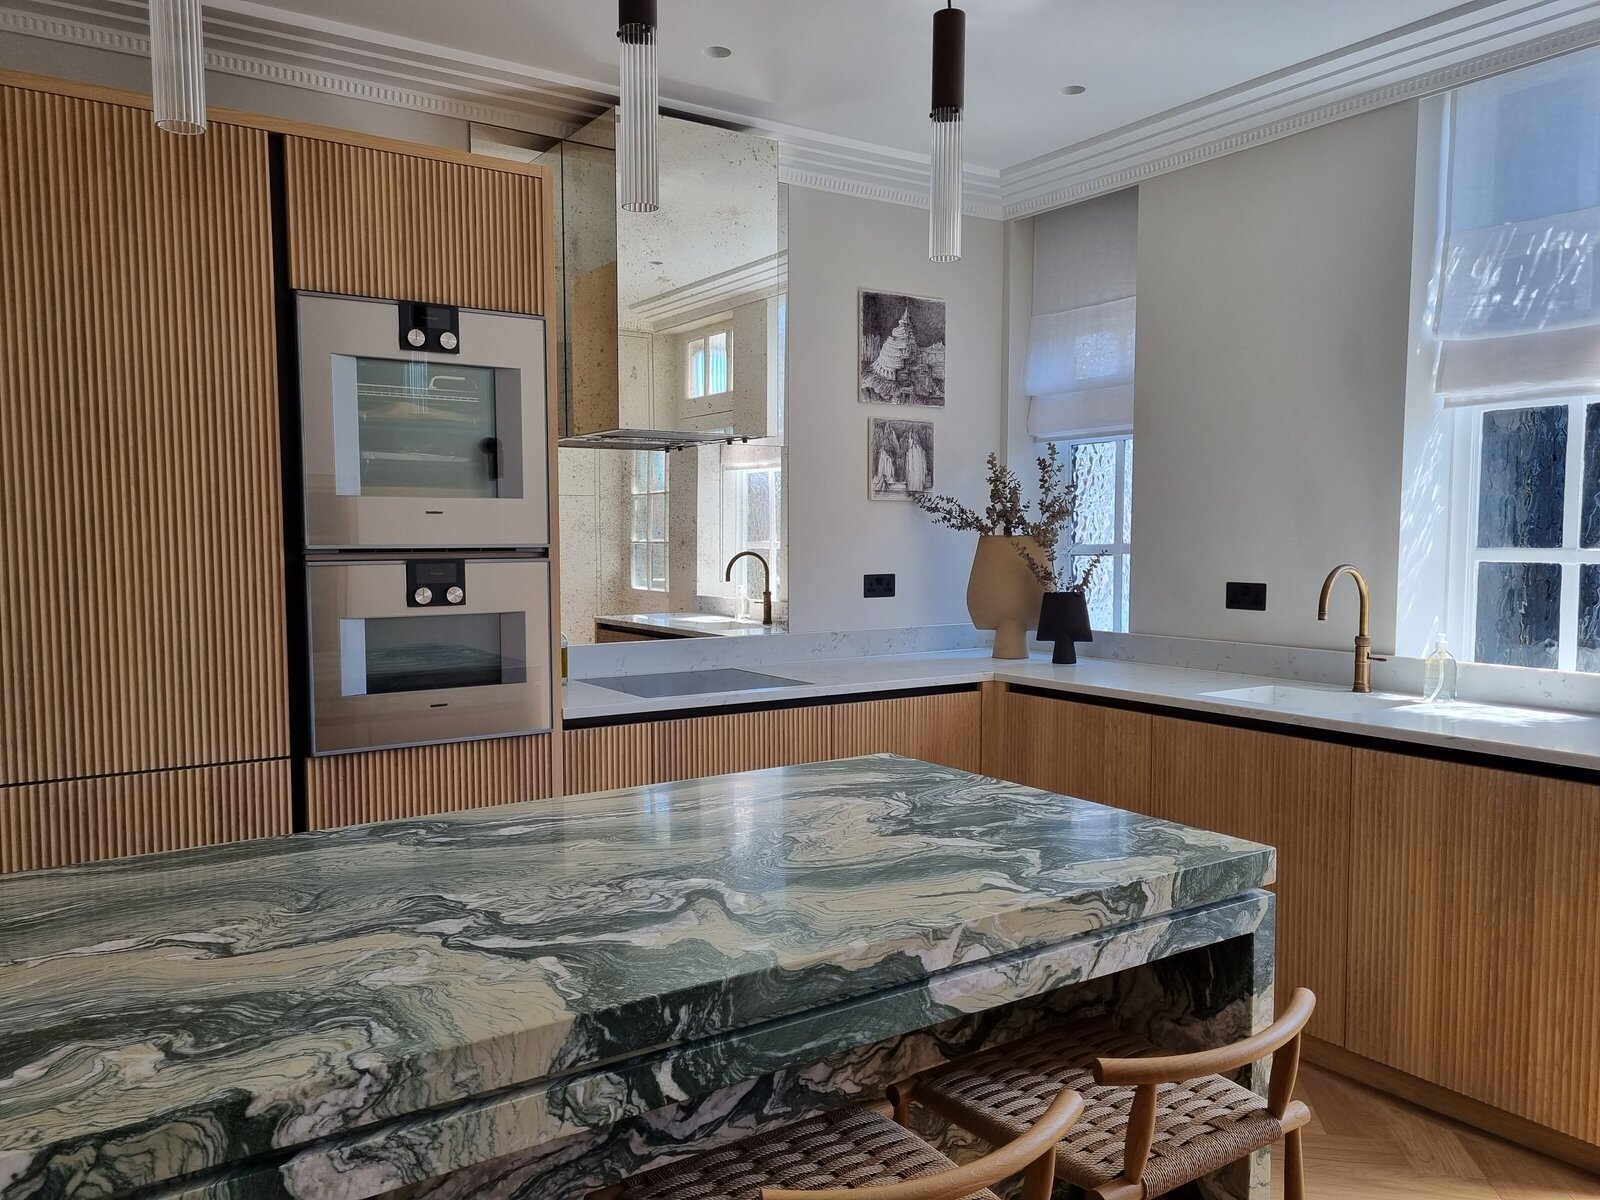 Marble island kitchen with fluted kitchen